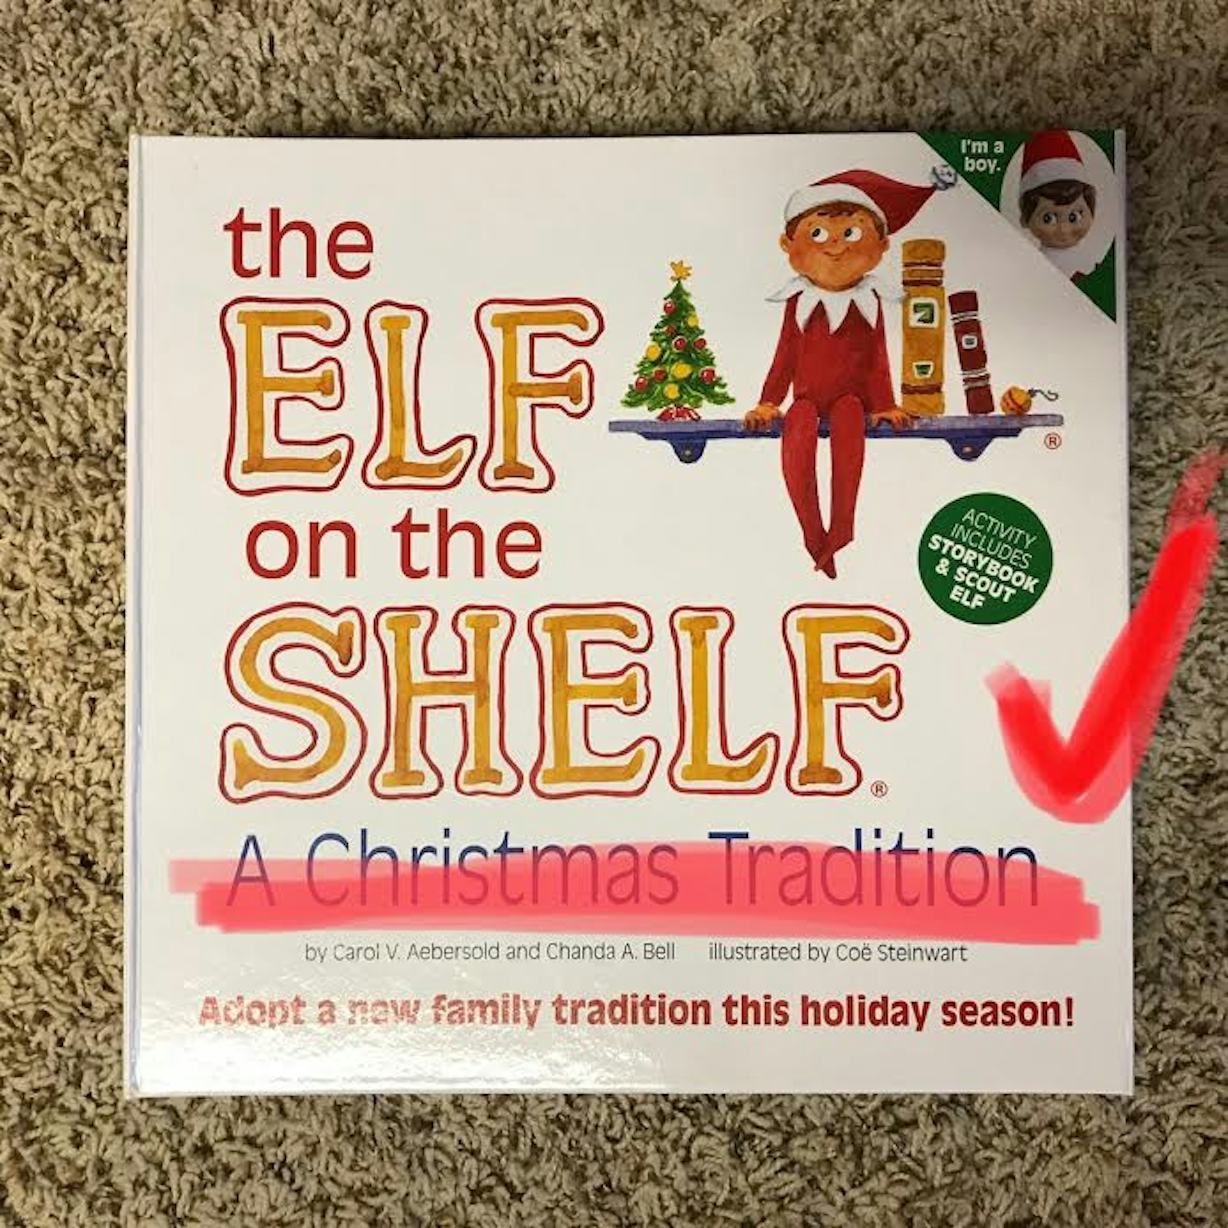 How To End Your Elf On The Shelf For Good, Because The Time Has Come